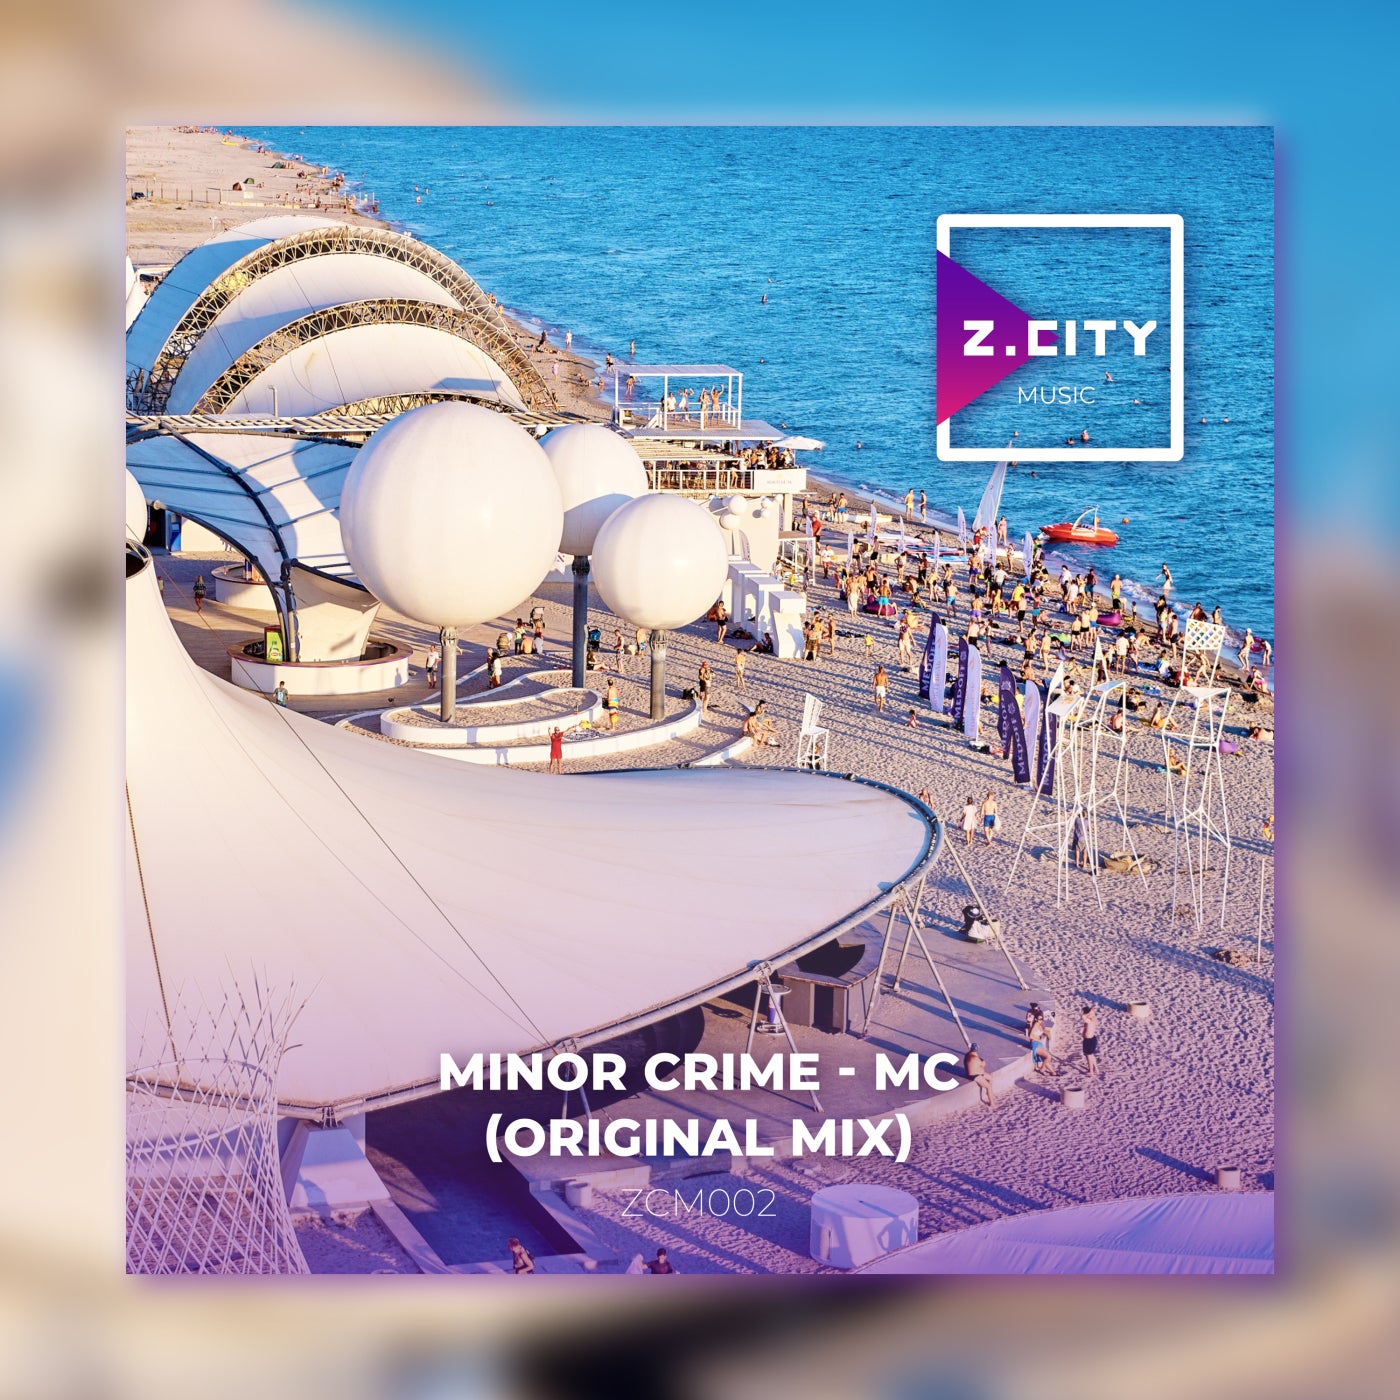 Sea of Sand from Z.CITY Music on Beatport